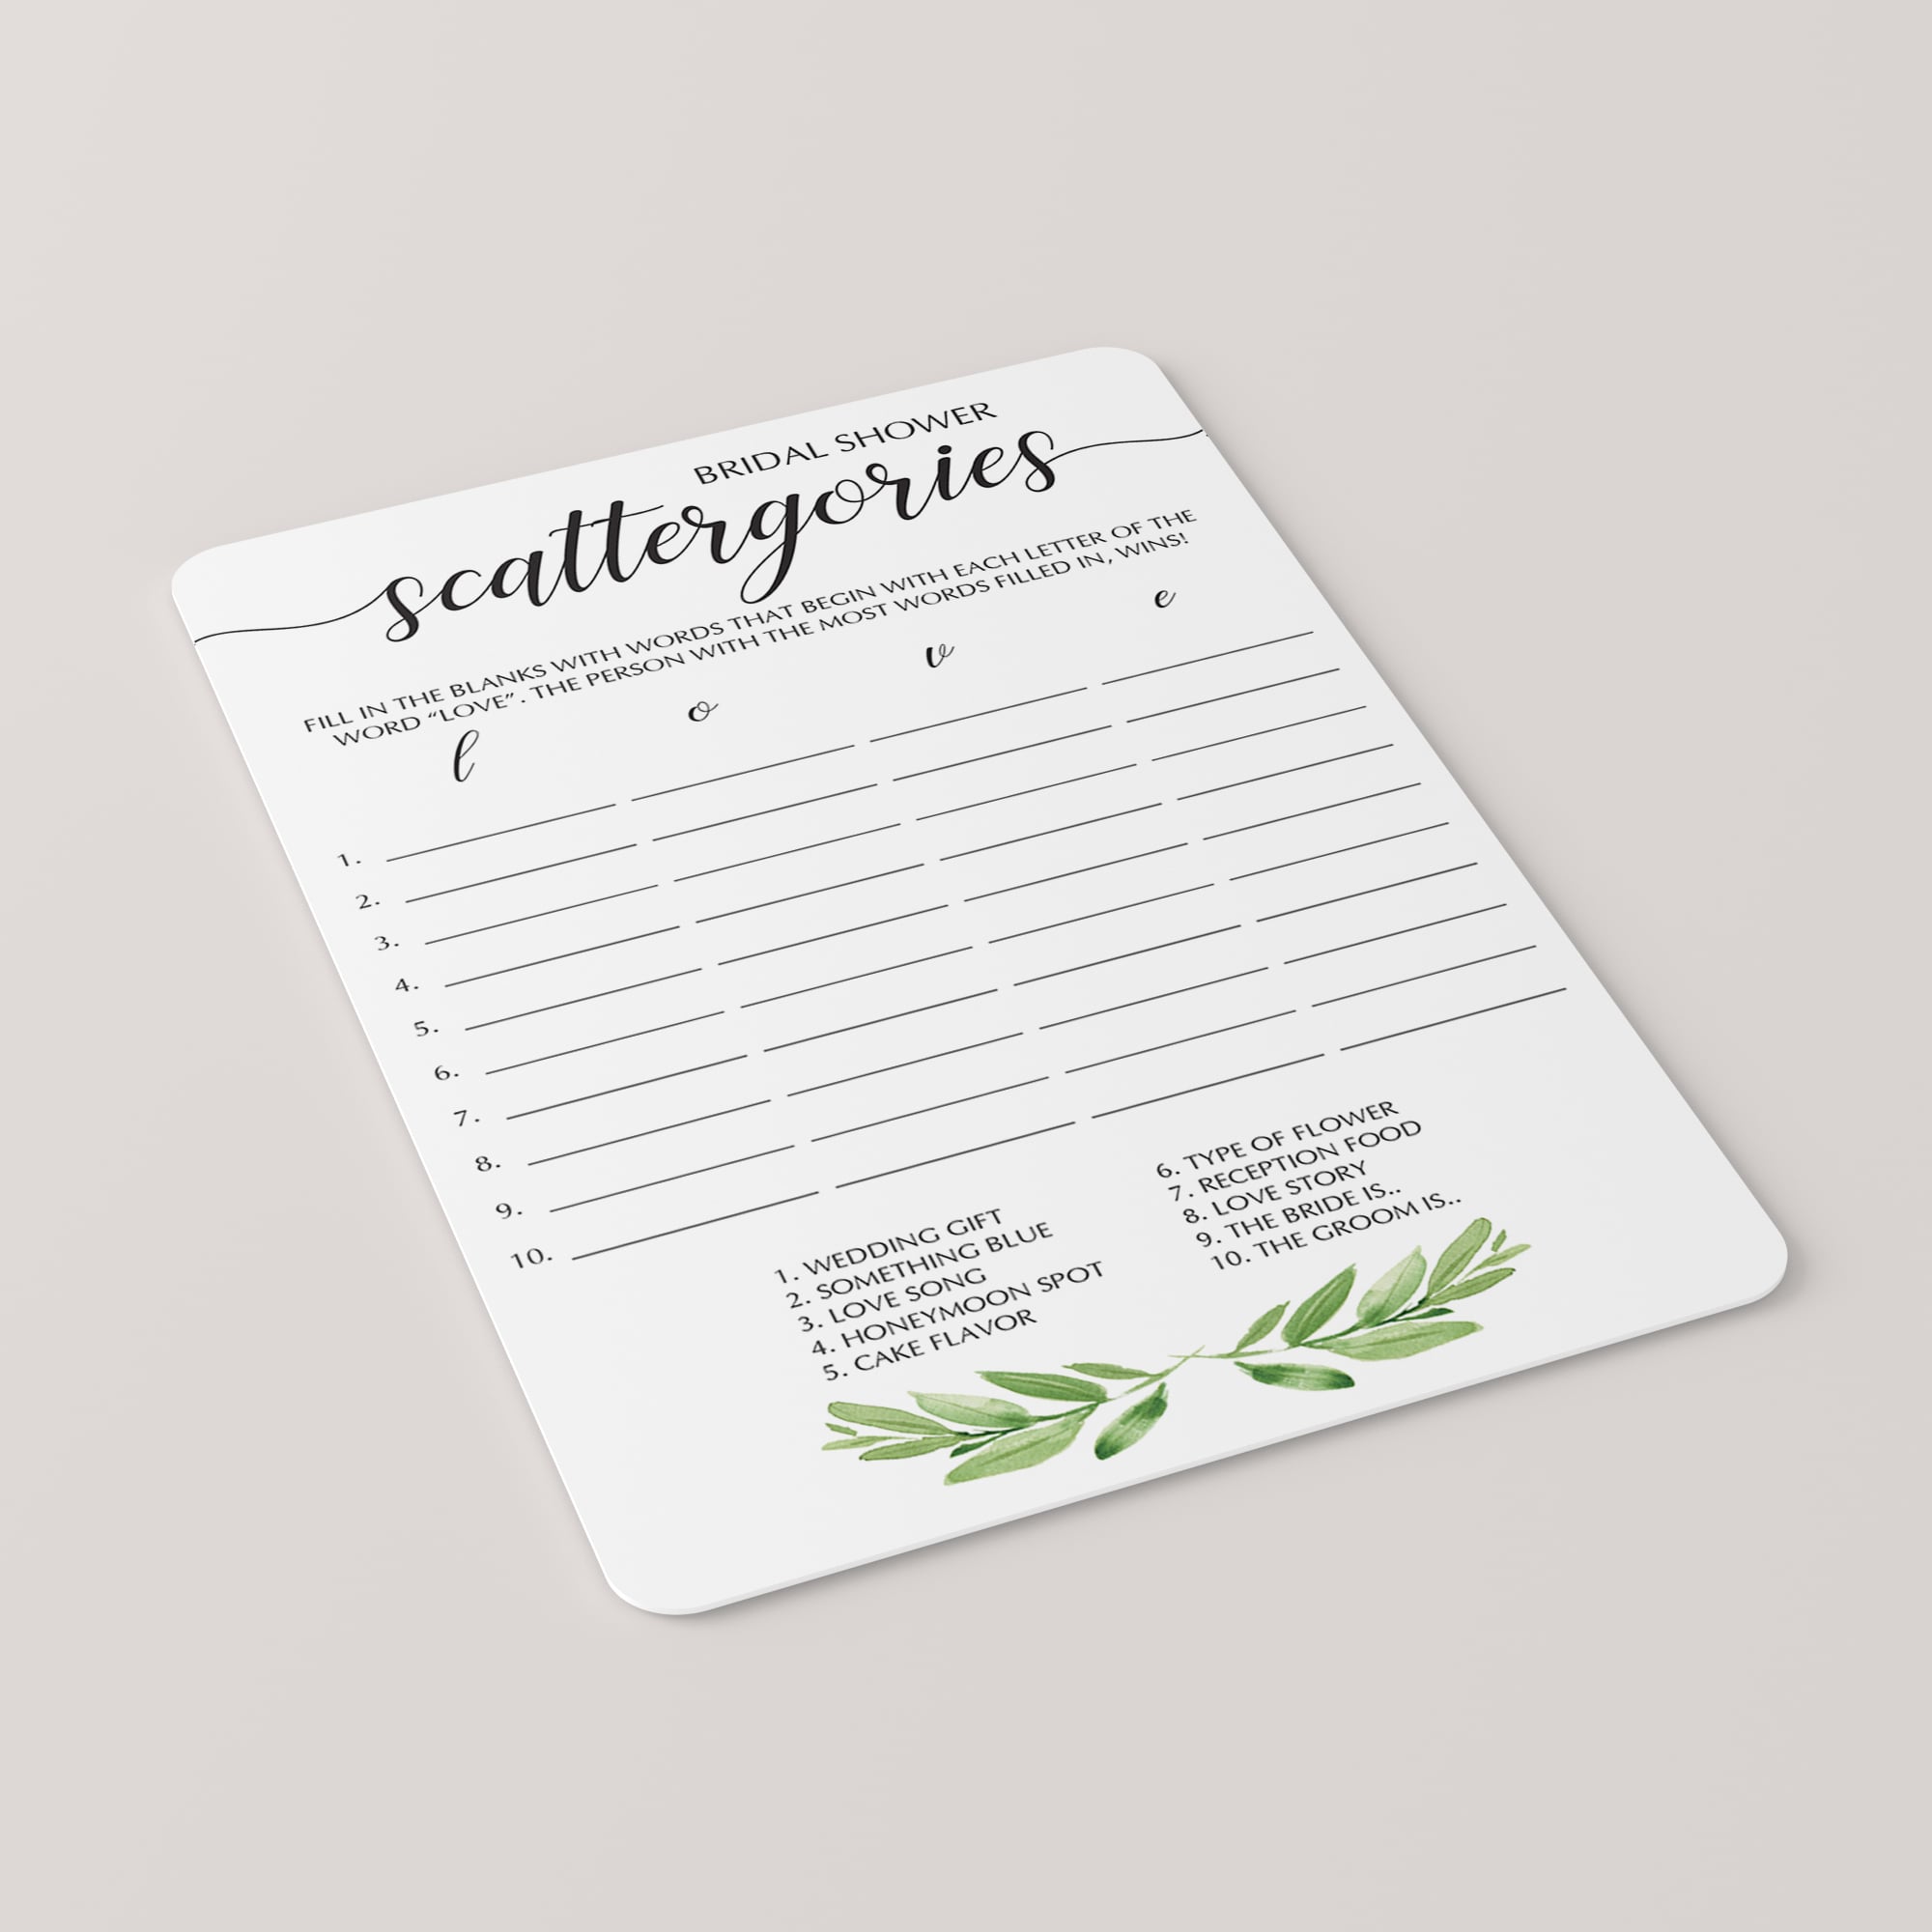 Bridal scattergories love game download by LittleSizzle